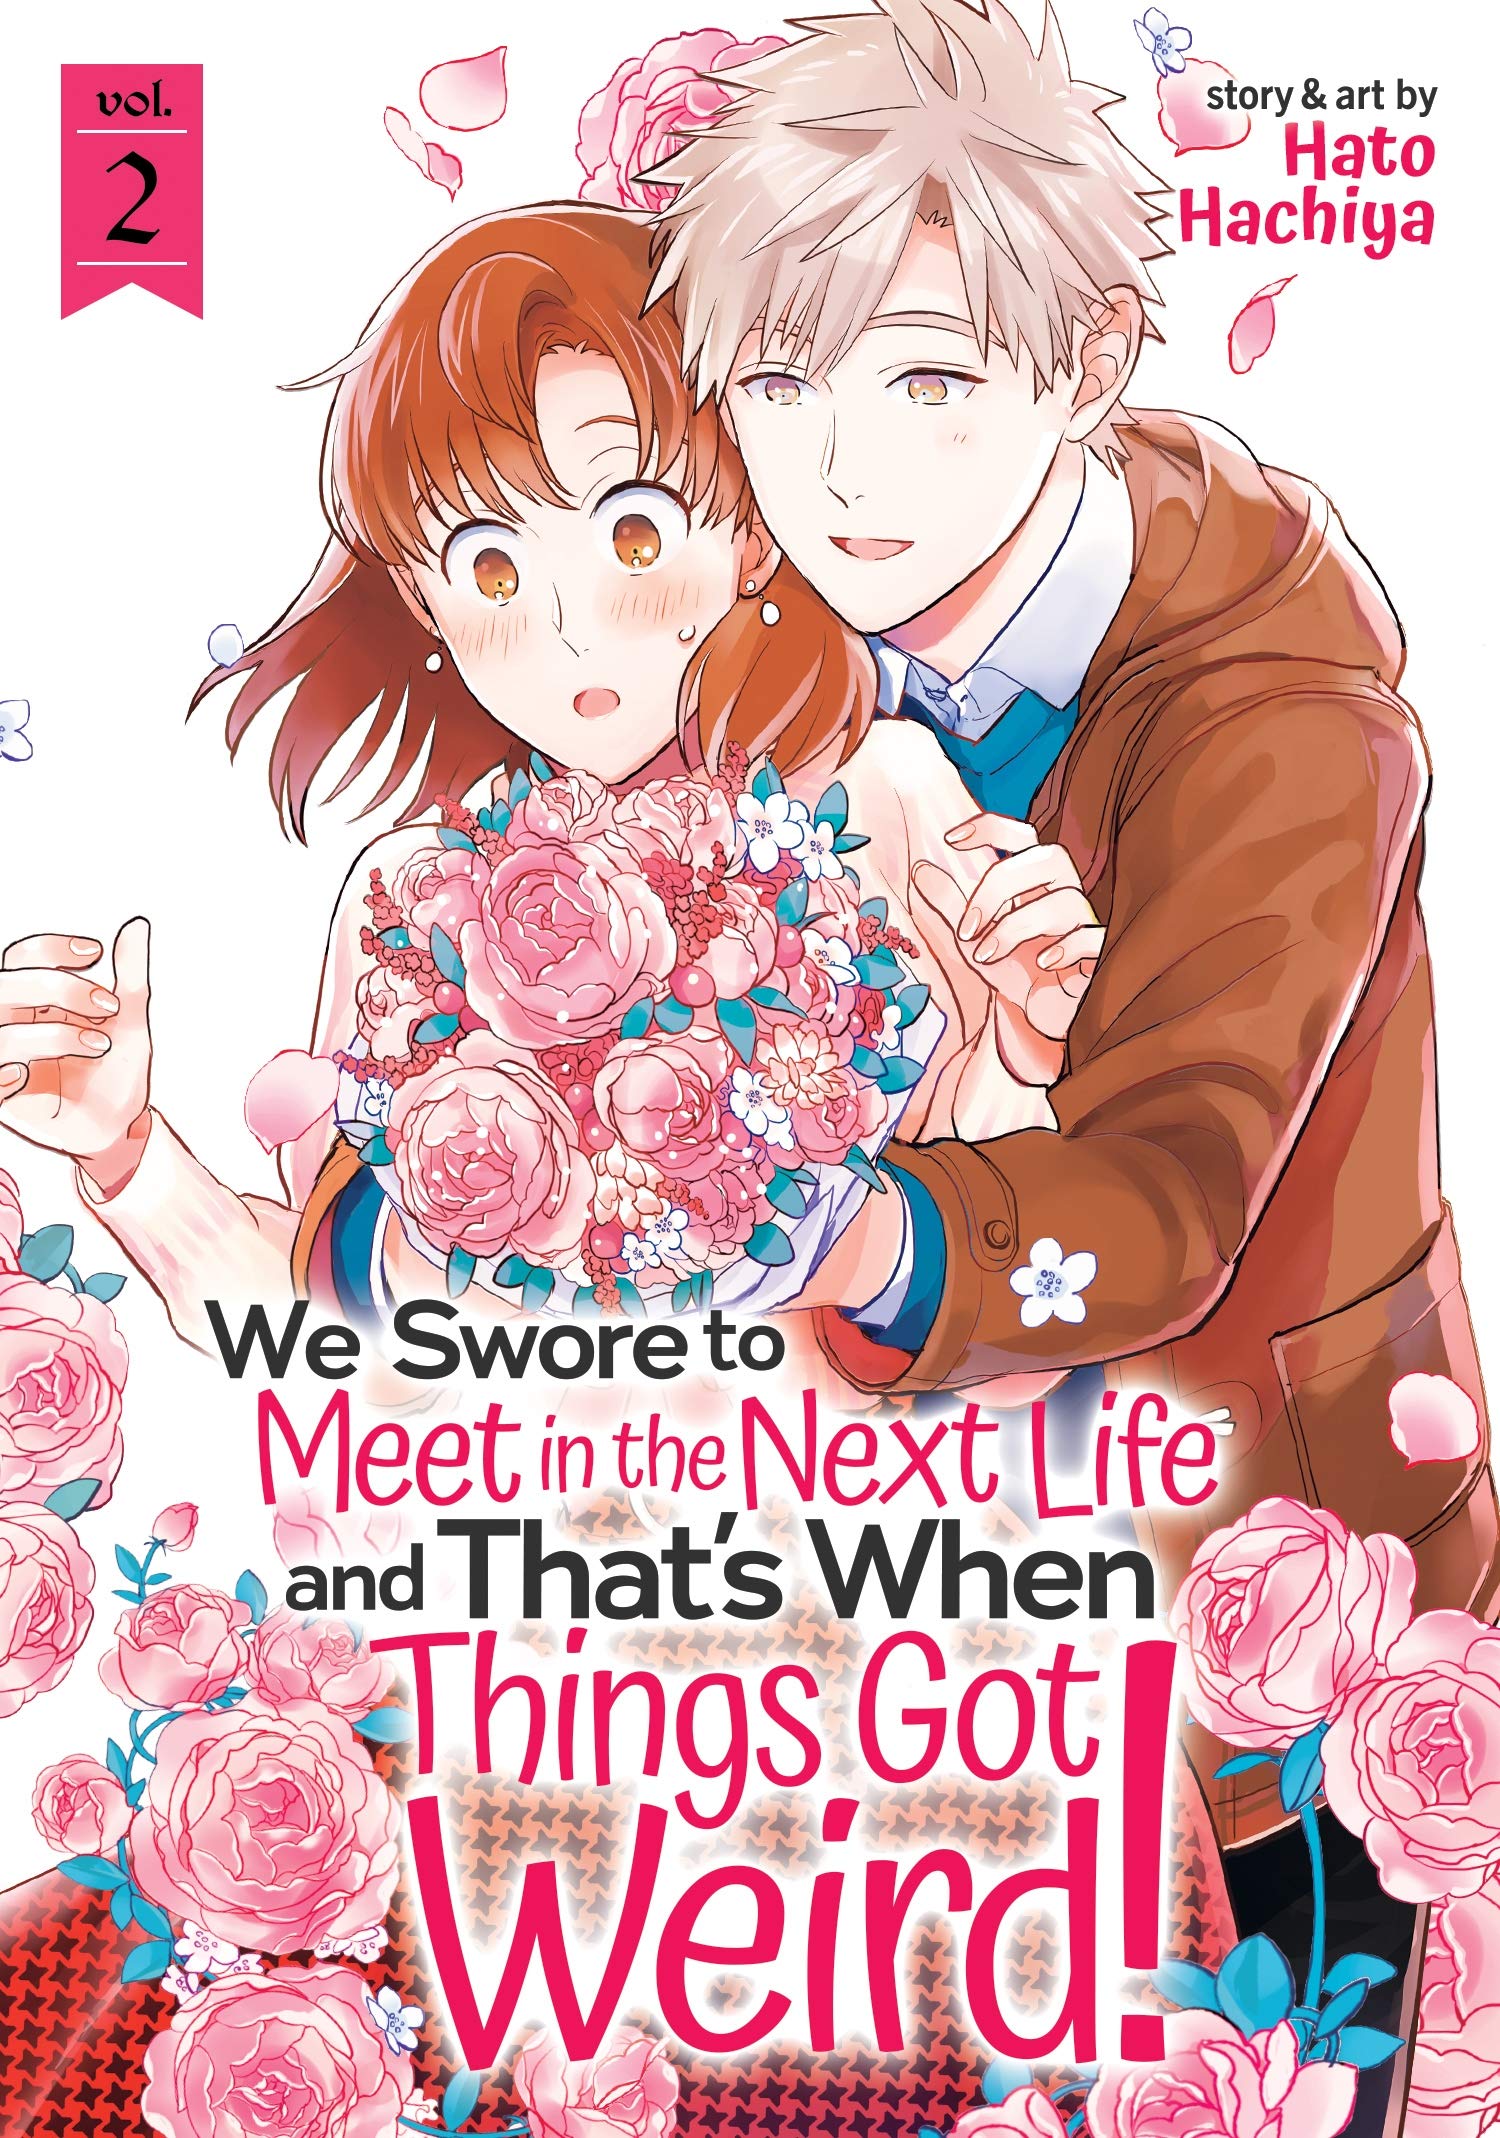 We Swore to Meet In the Next Life and That’s When Things Got Weird! - Volume 2